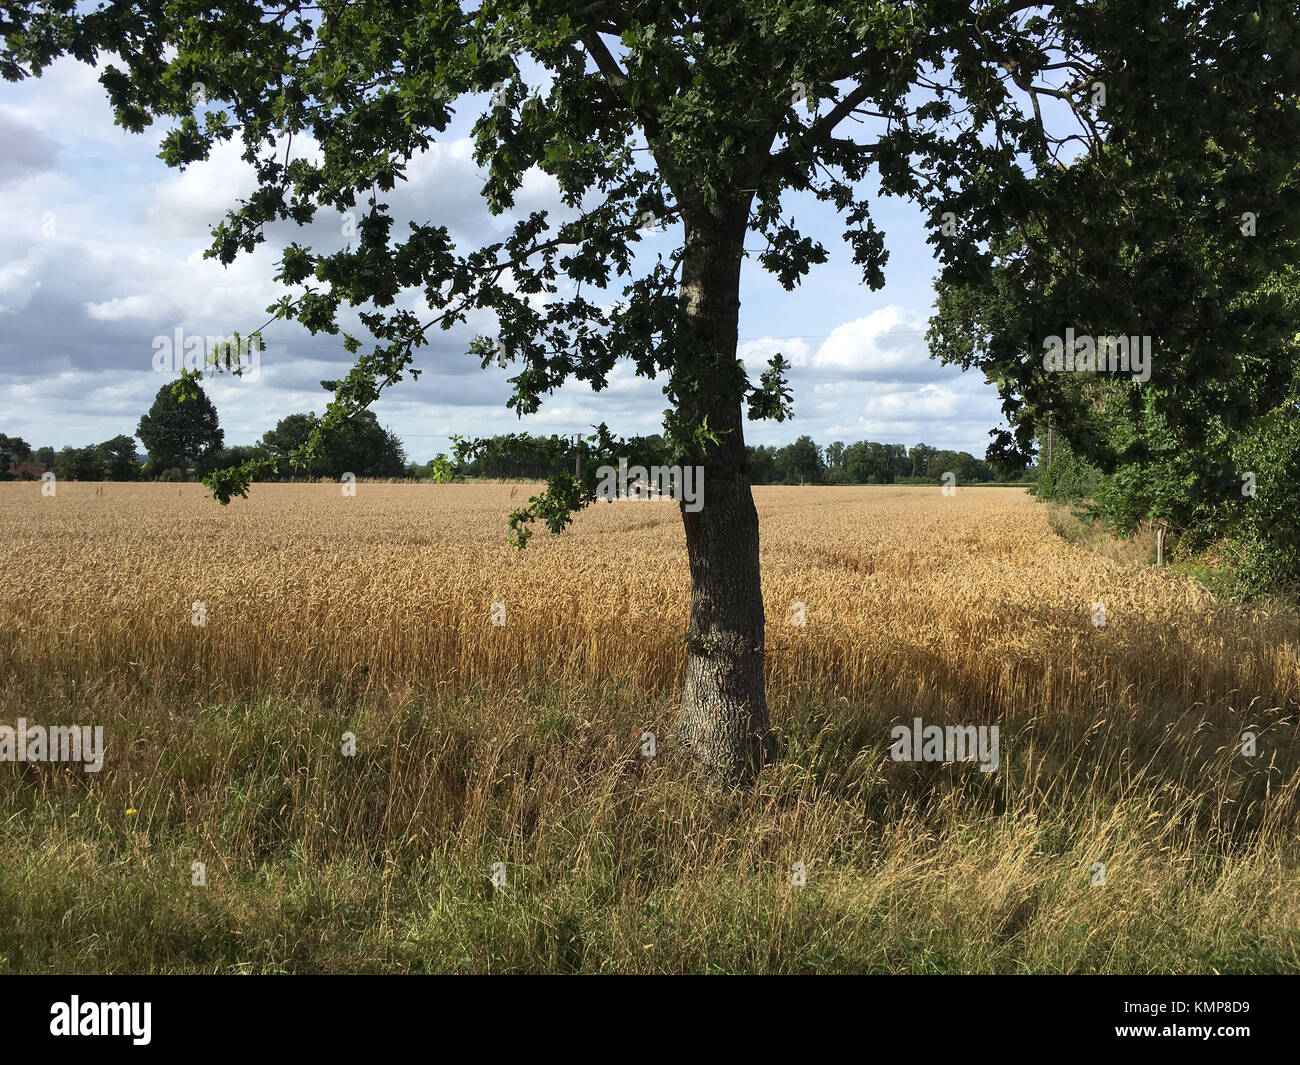 Wheat field in Normandy with a tree in the foreground. Stock Photo